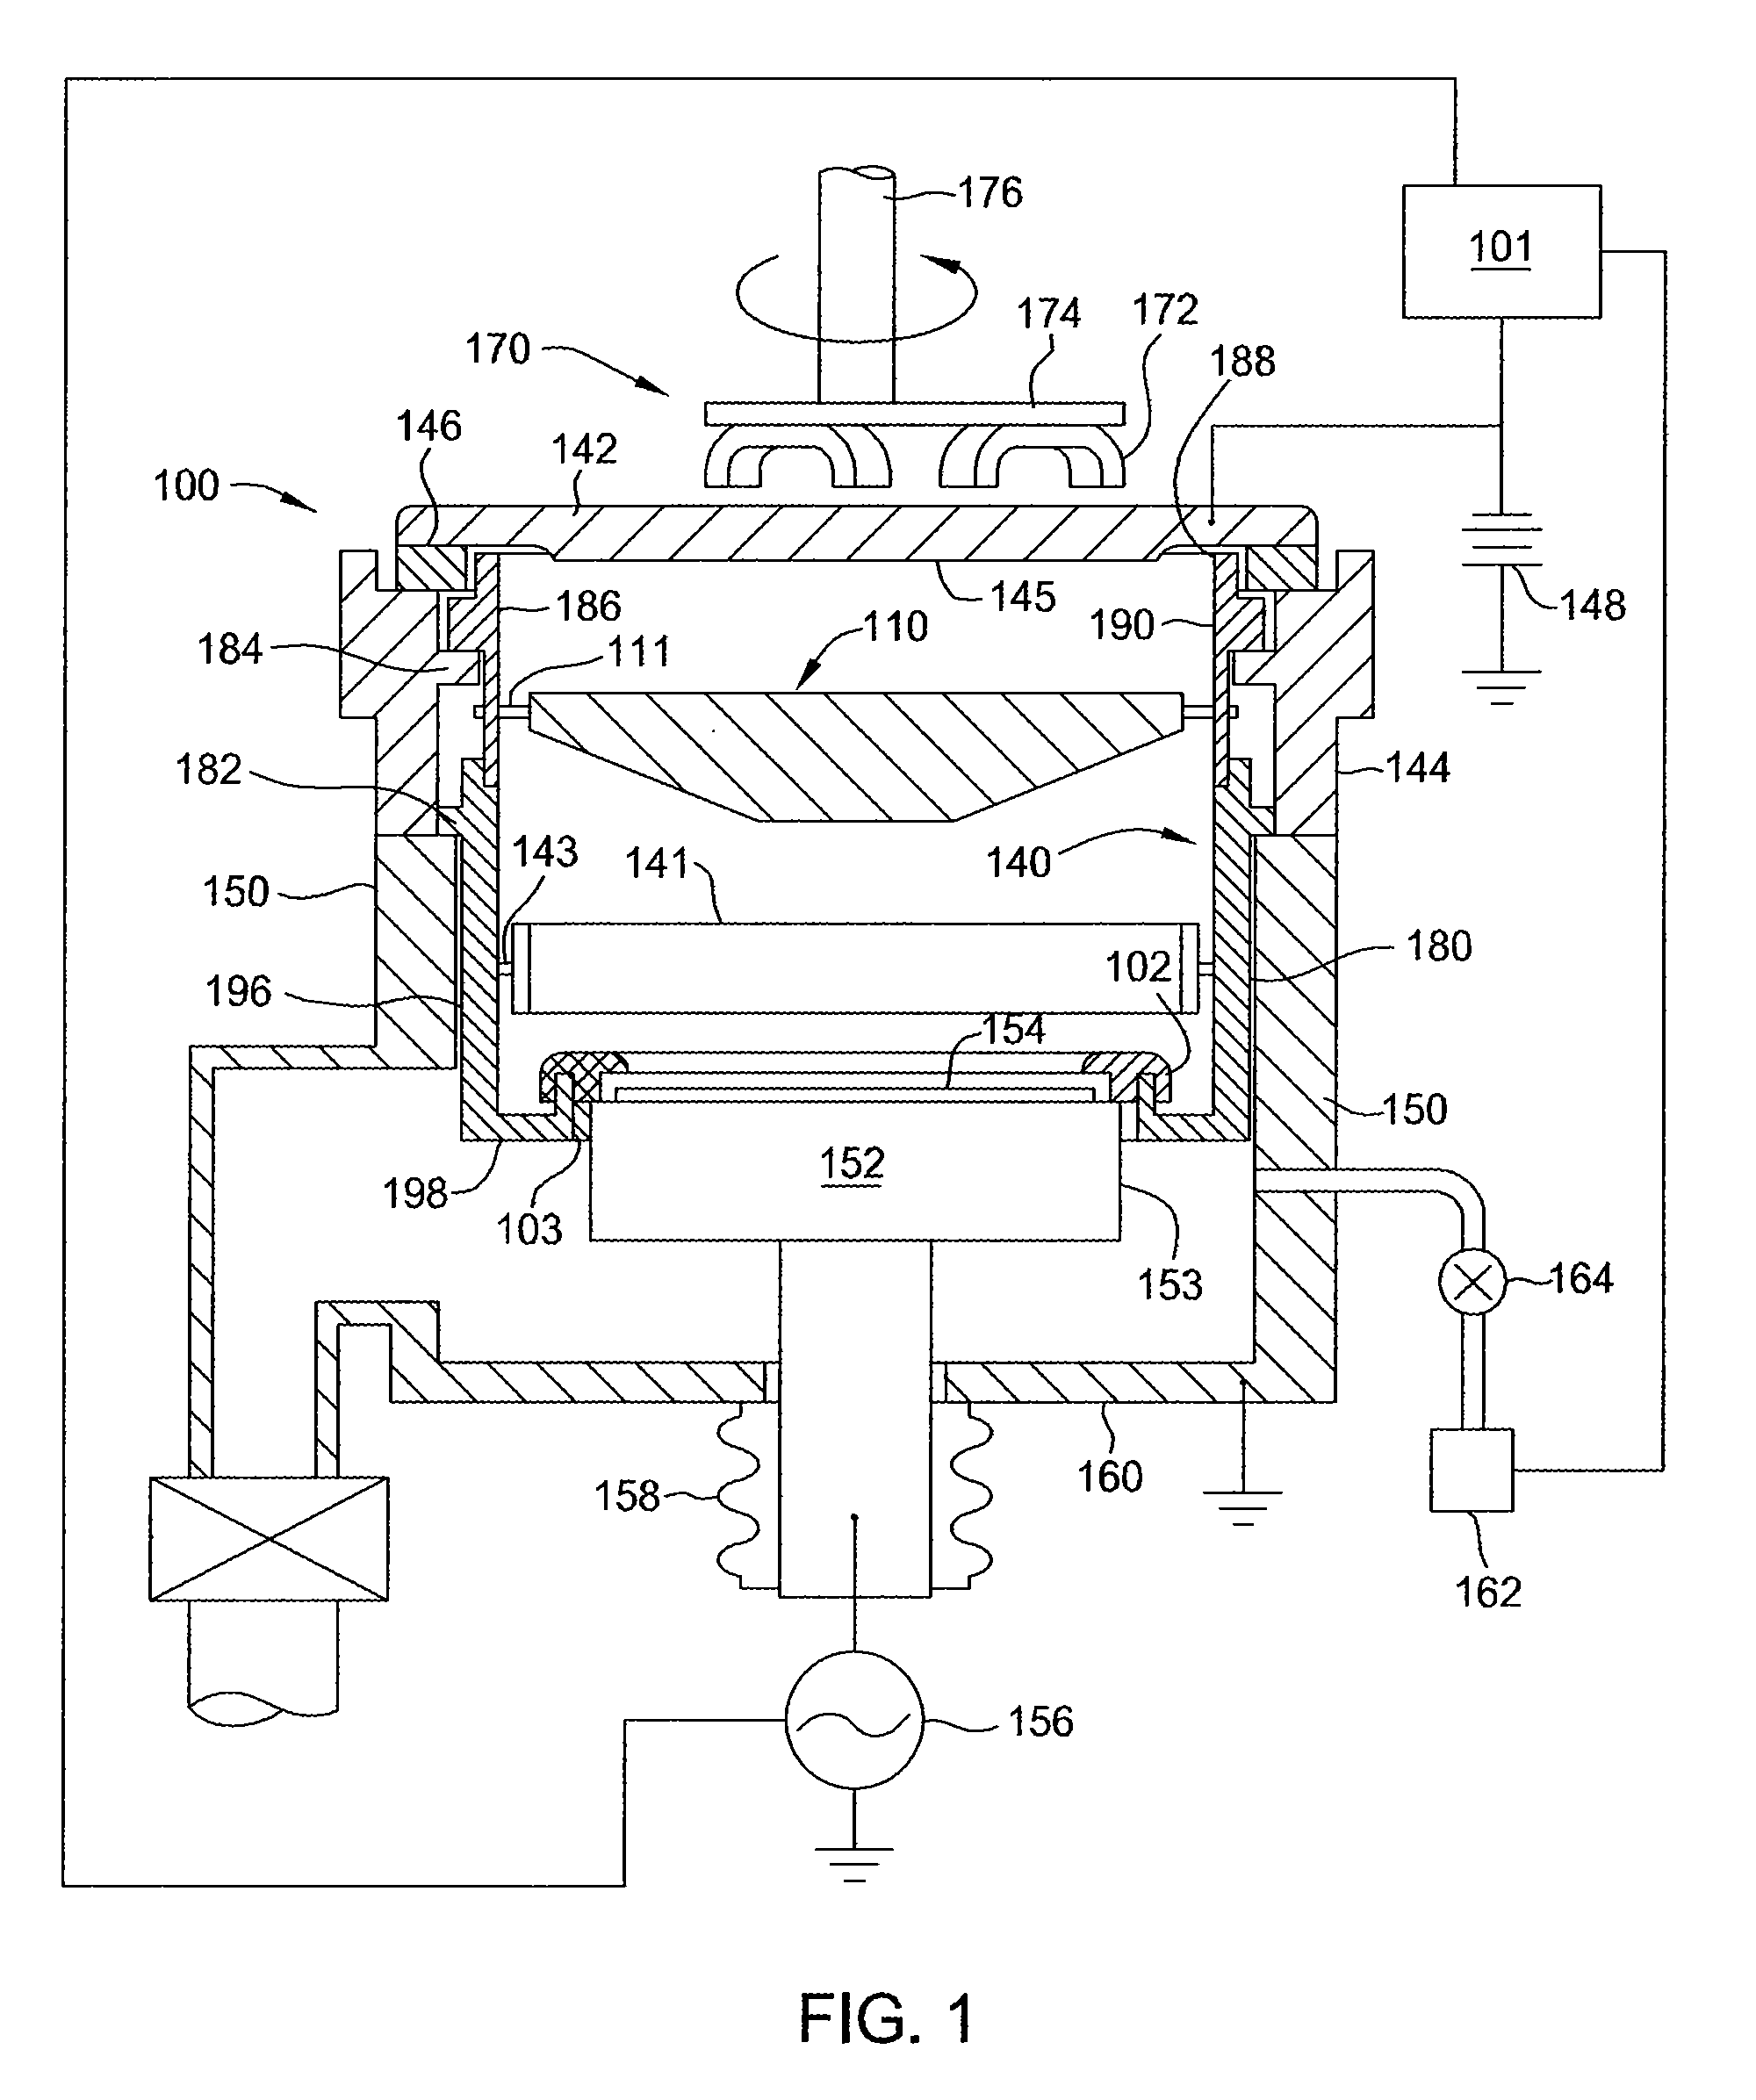 Wafer processing deposition shielding components